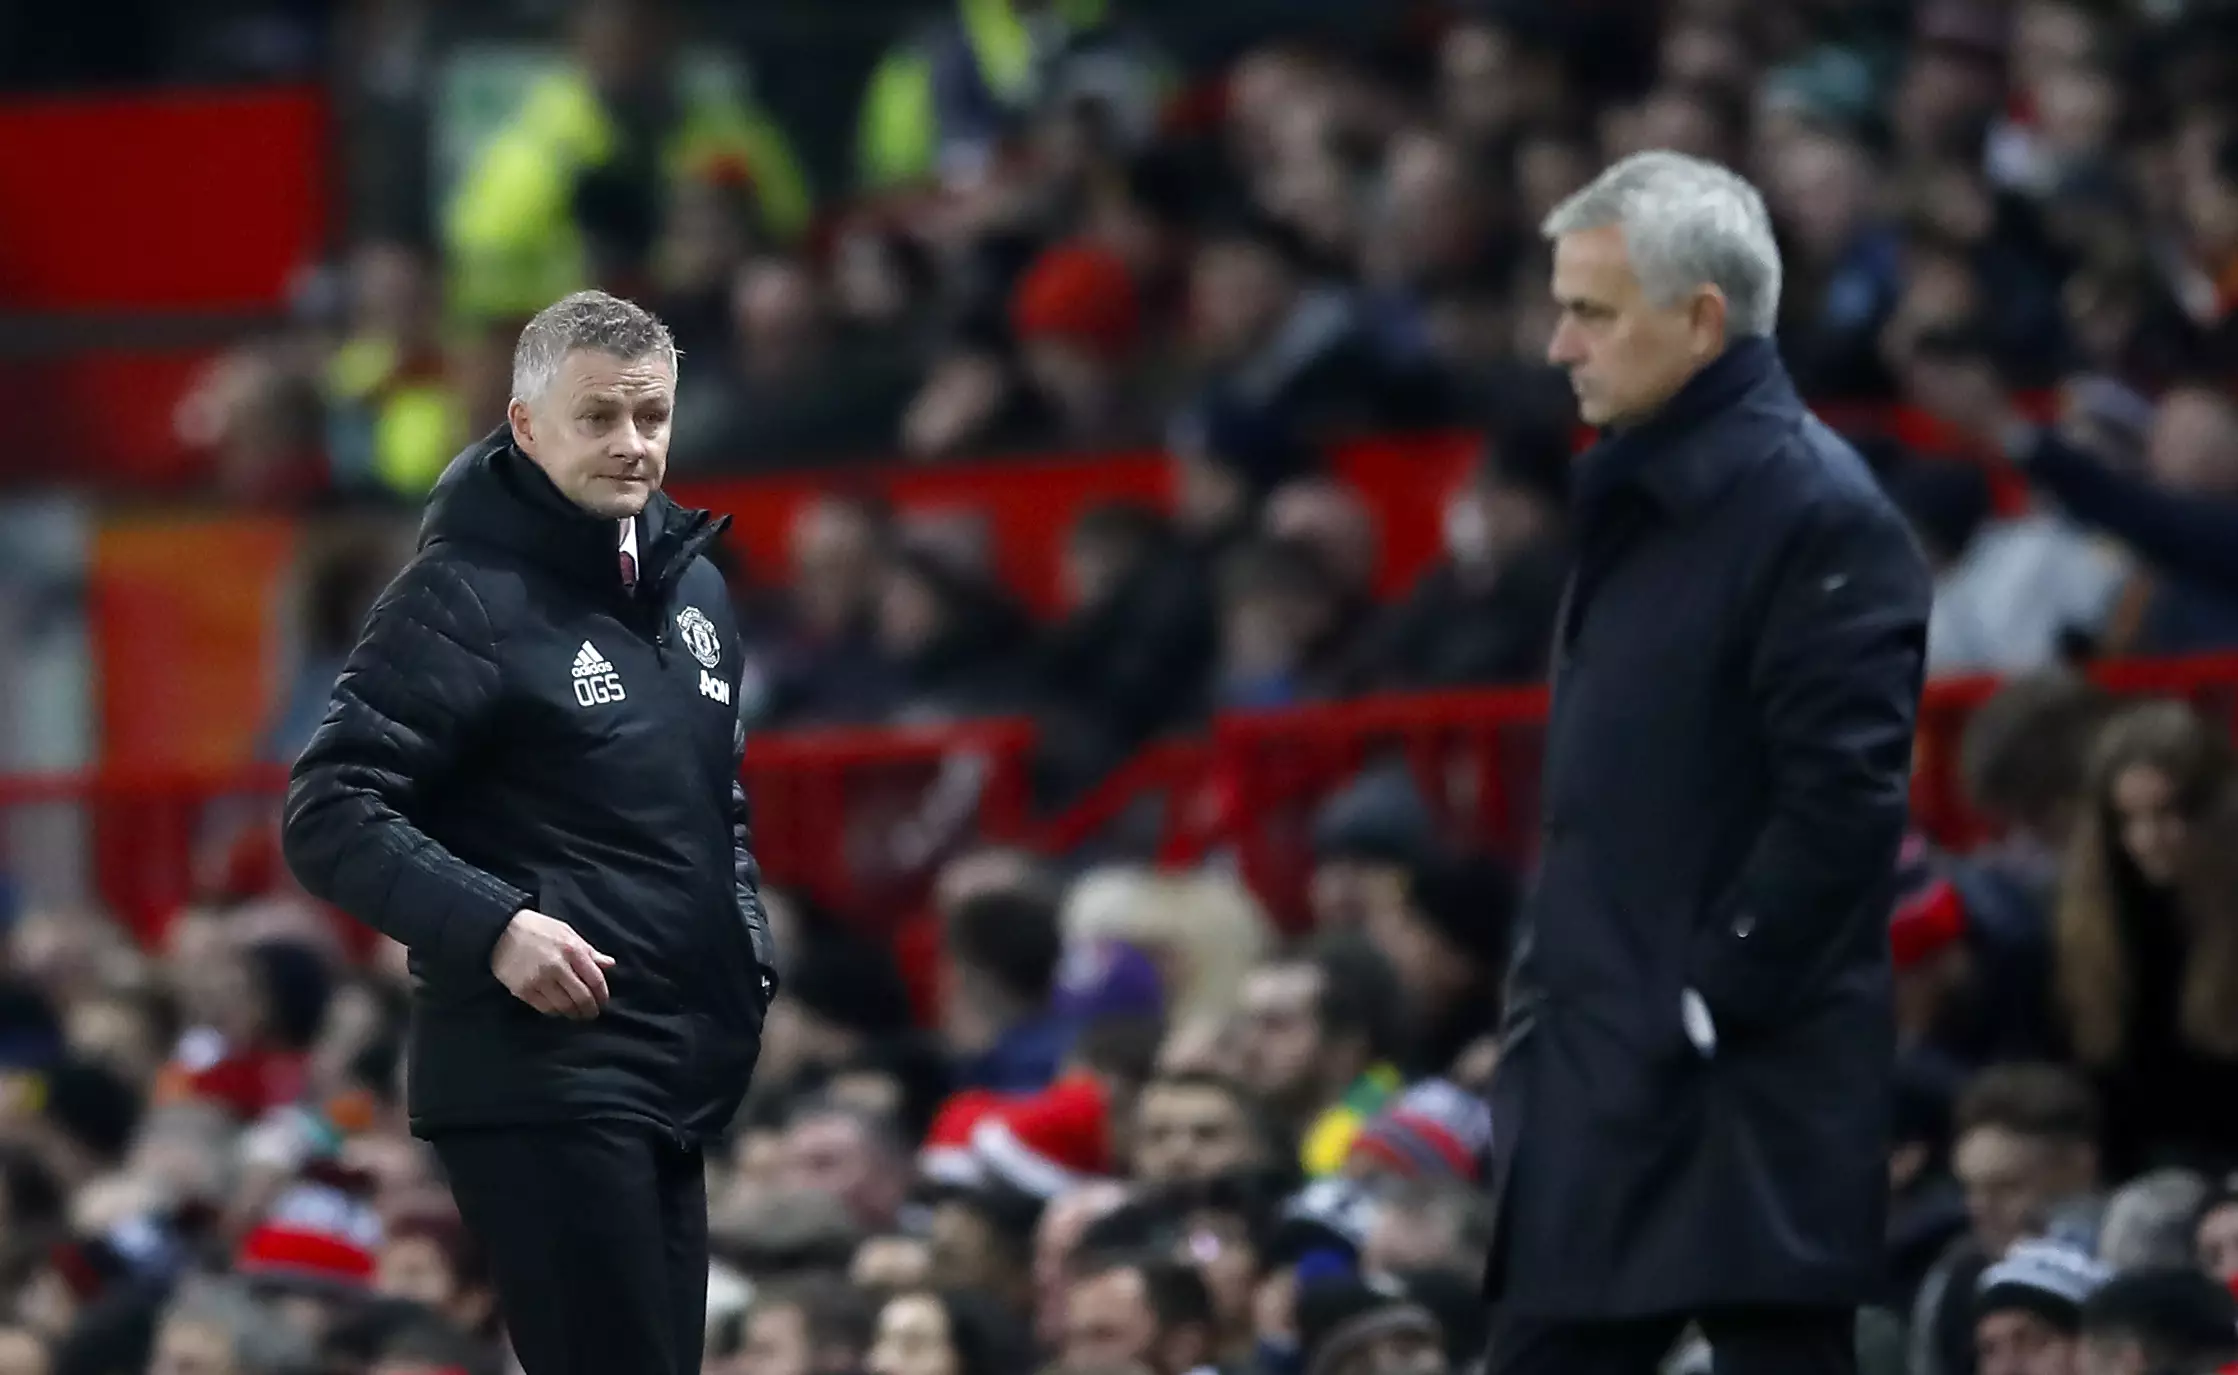 Solskjaer and Mourinho's records are closer than you might think. Image: PA Images